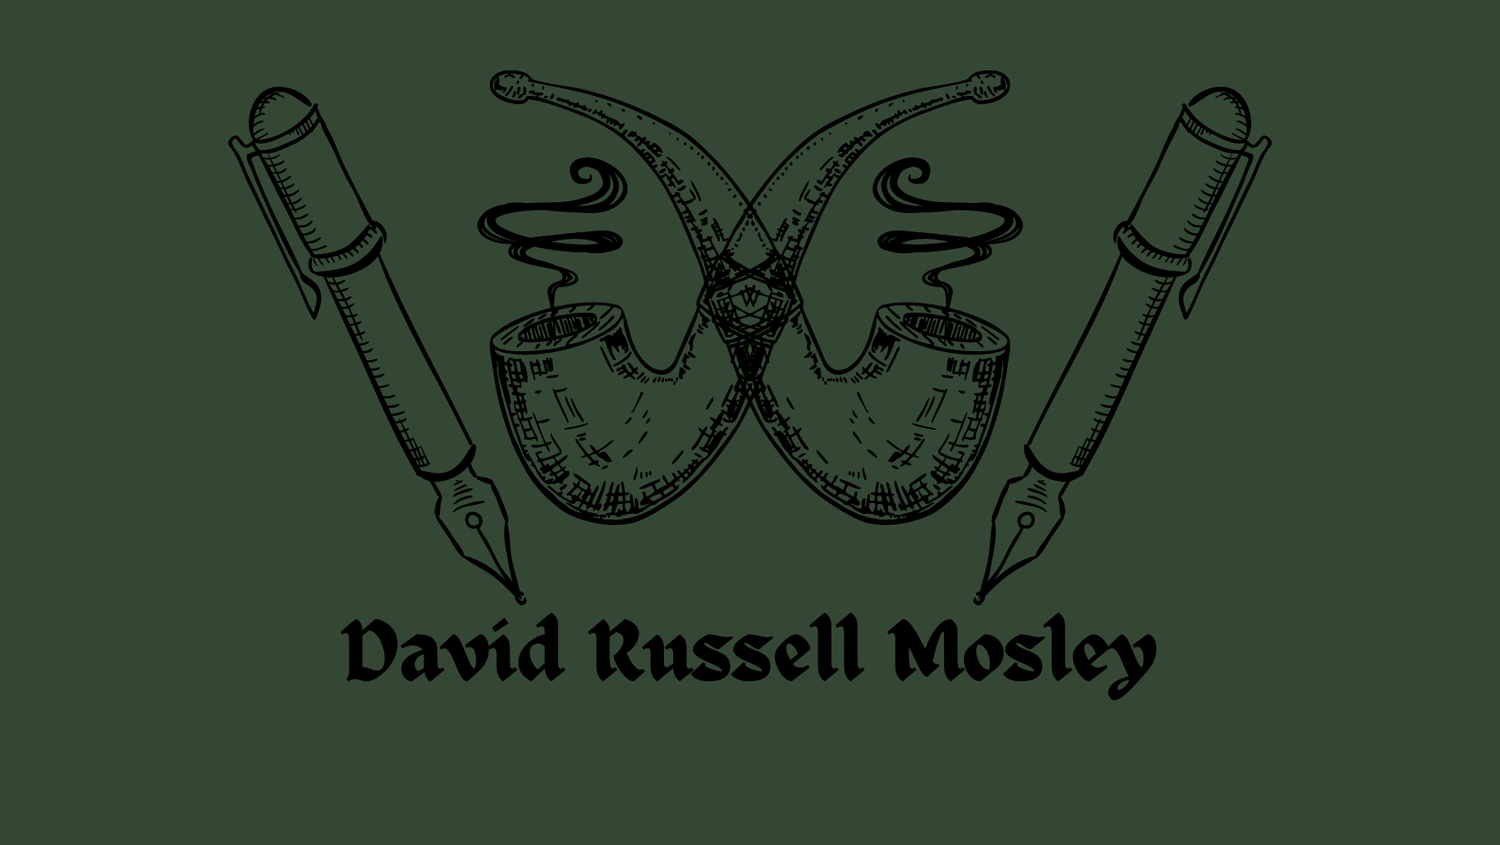 David Russell Mosley